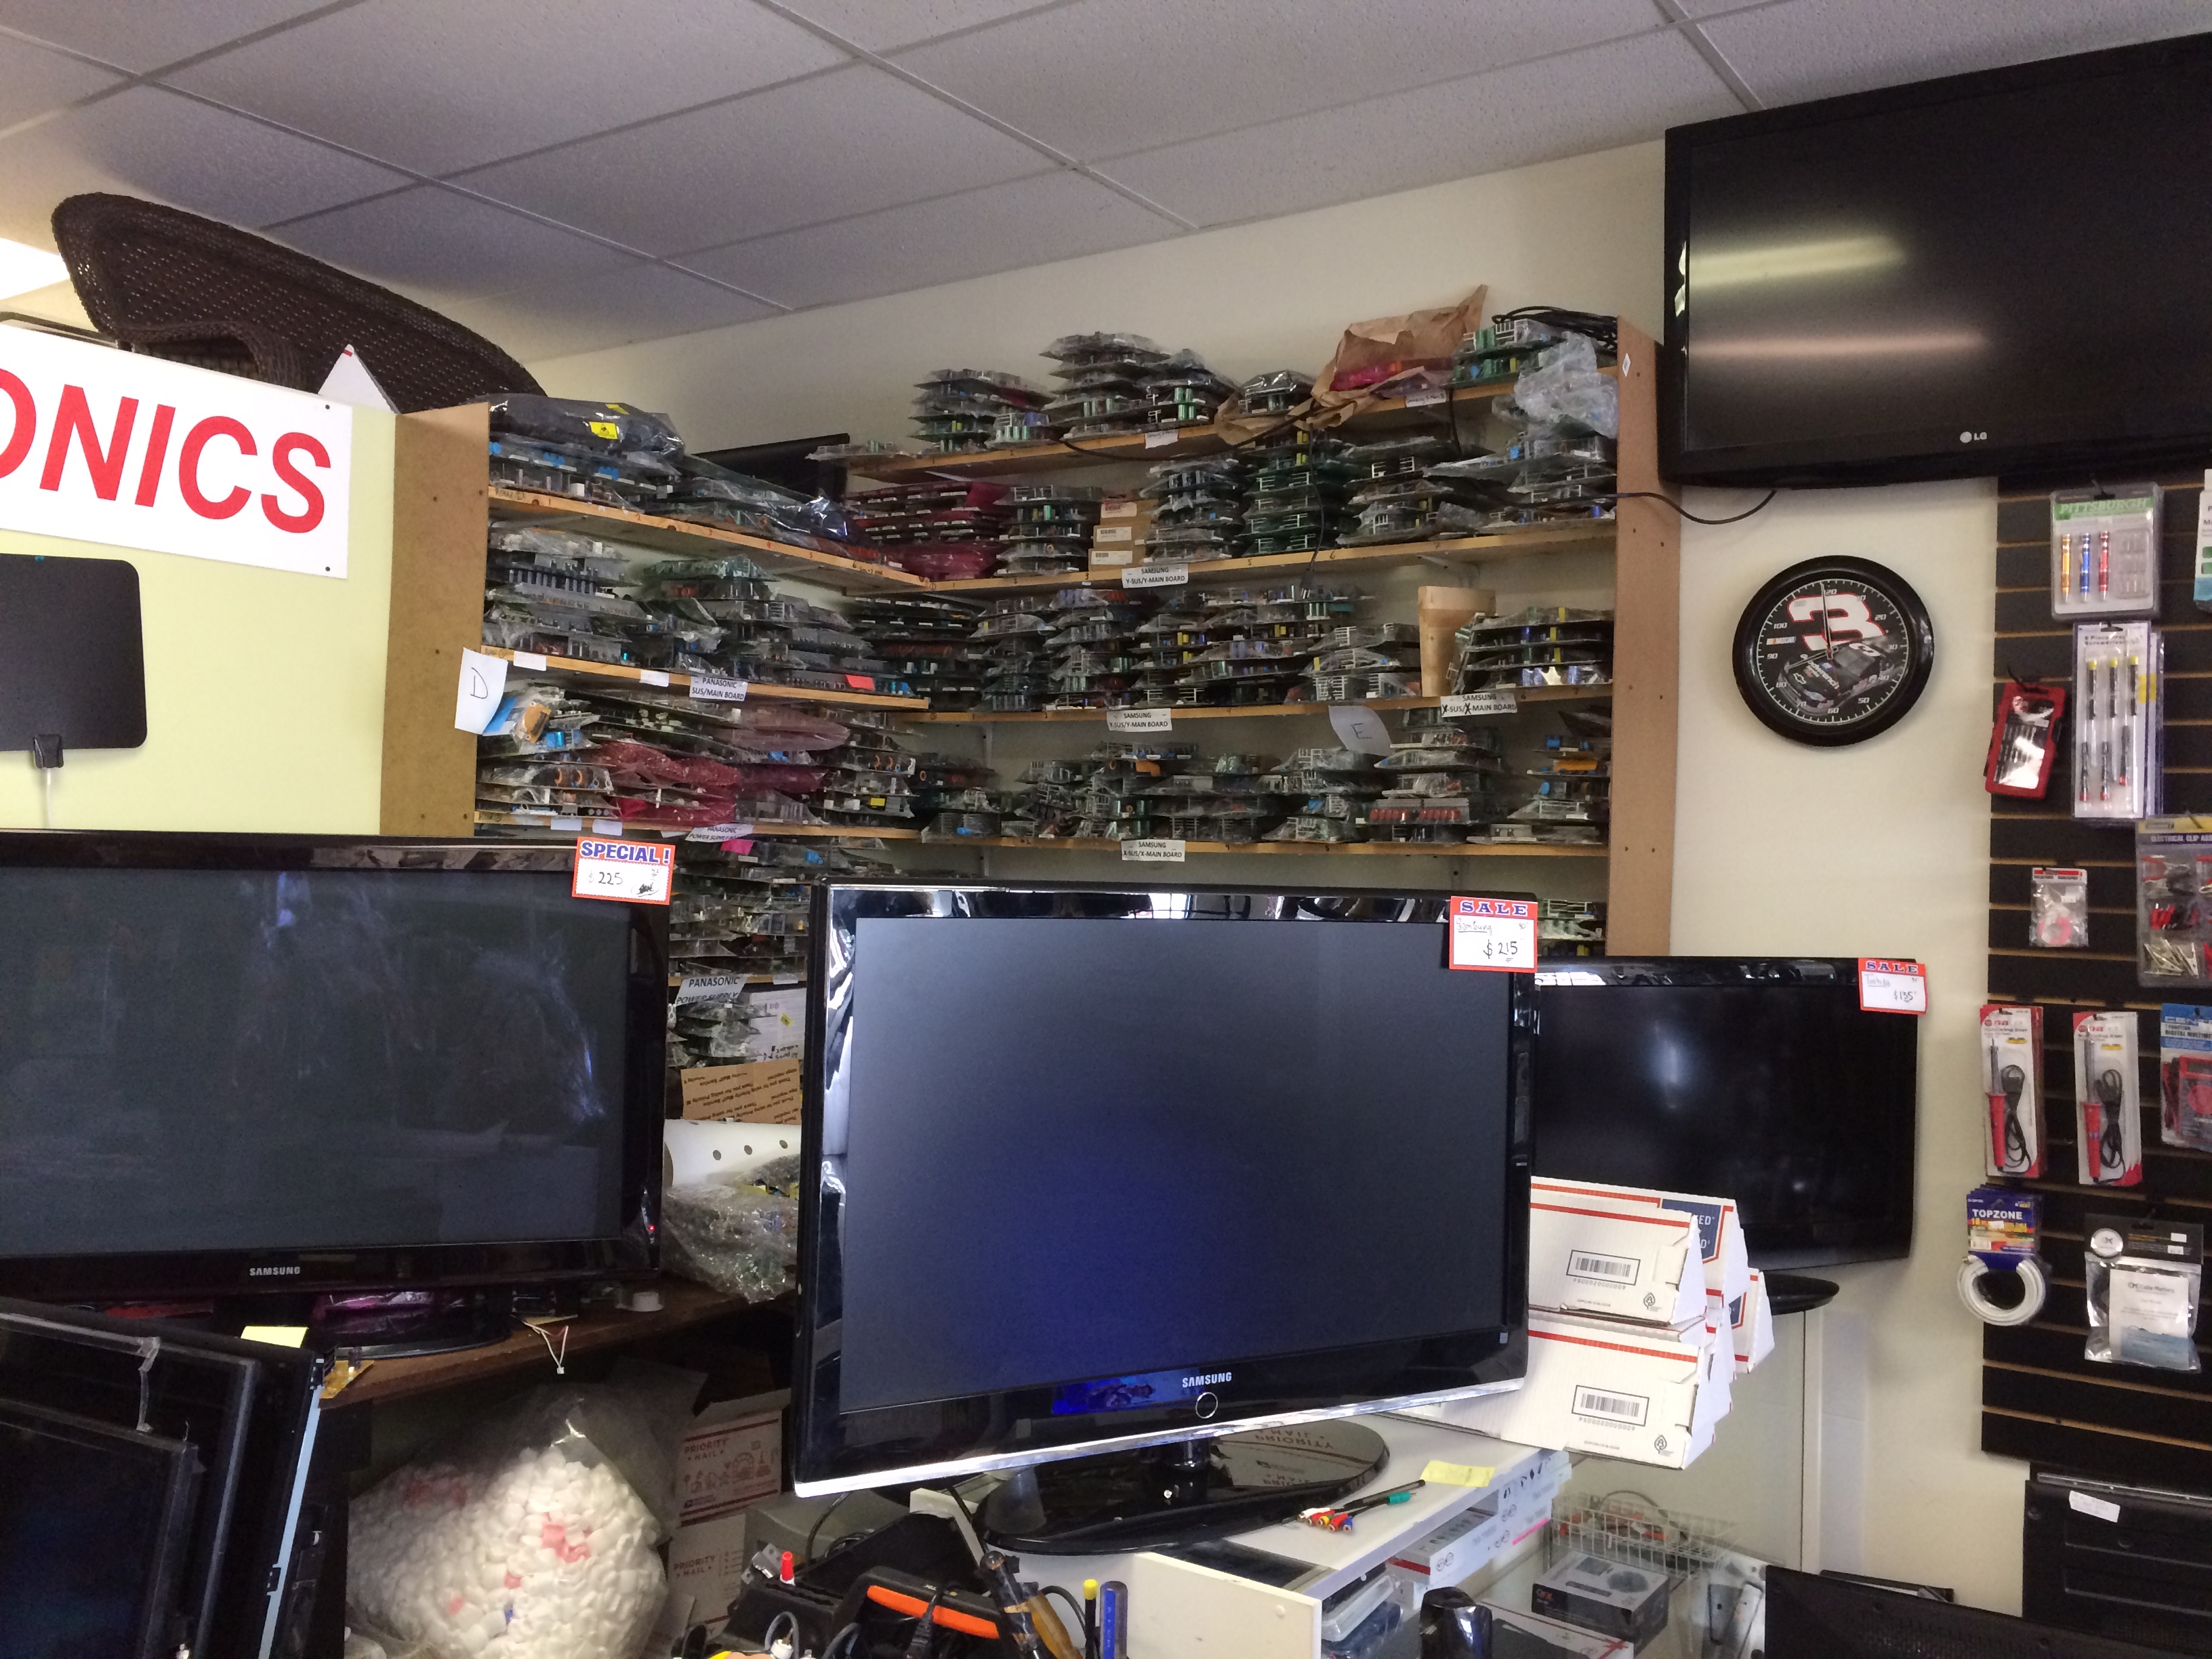 TORRES ELECTRONICS TV REPAIR AND PARTS Coupons near me in ...